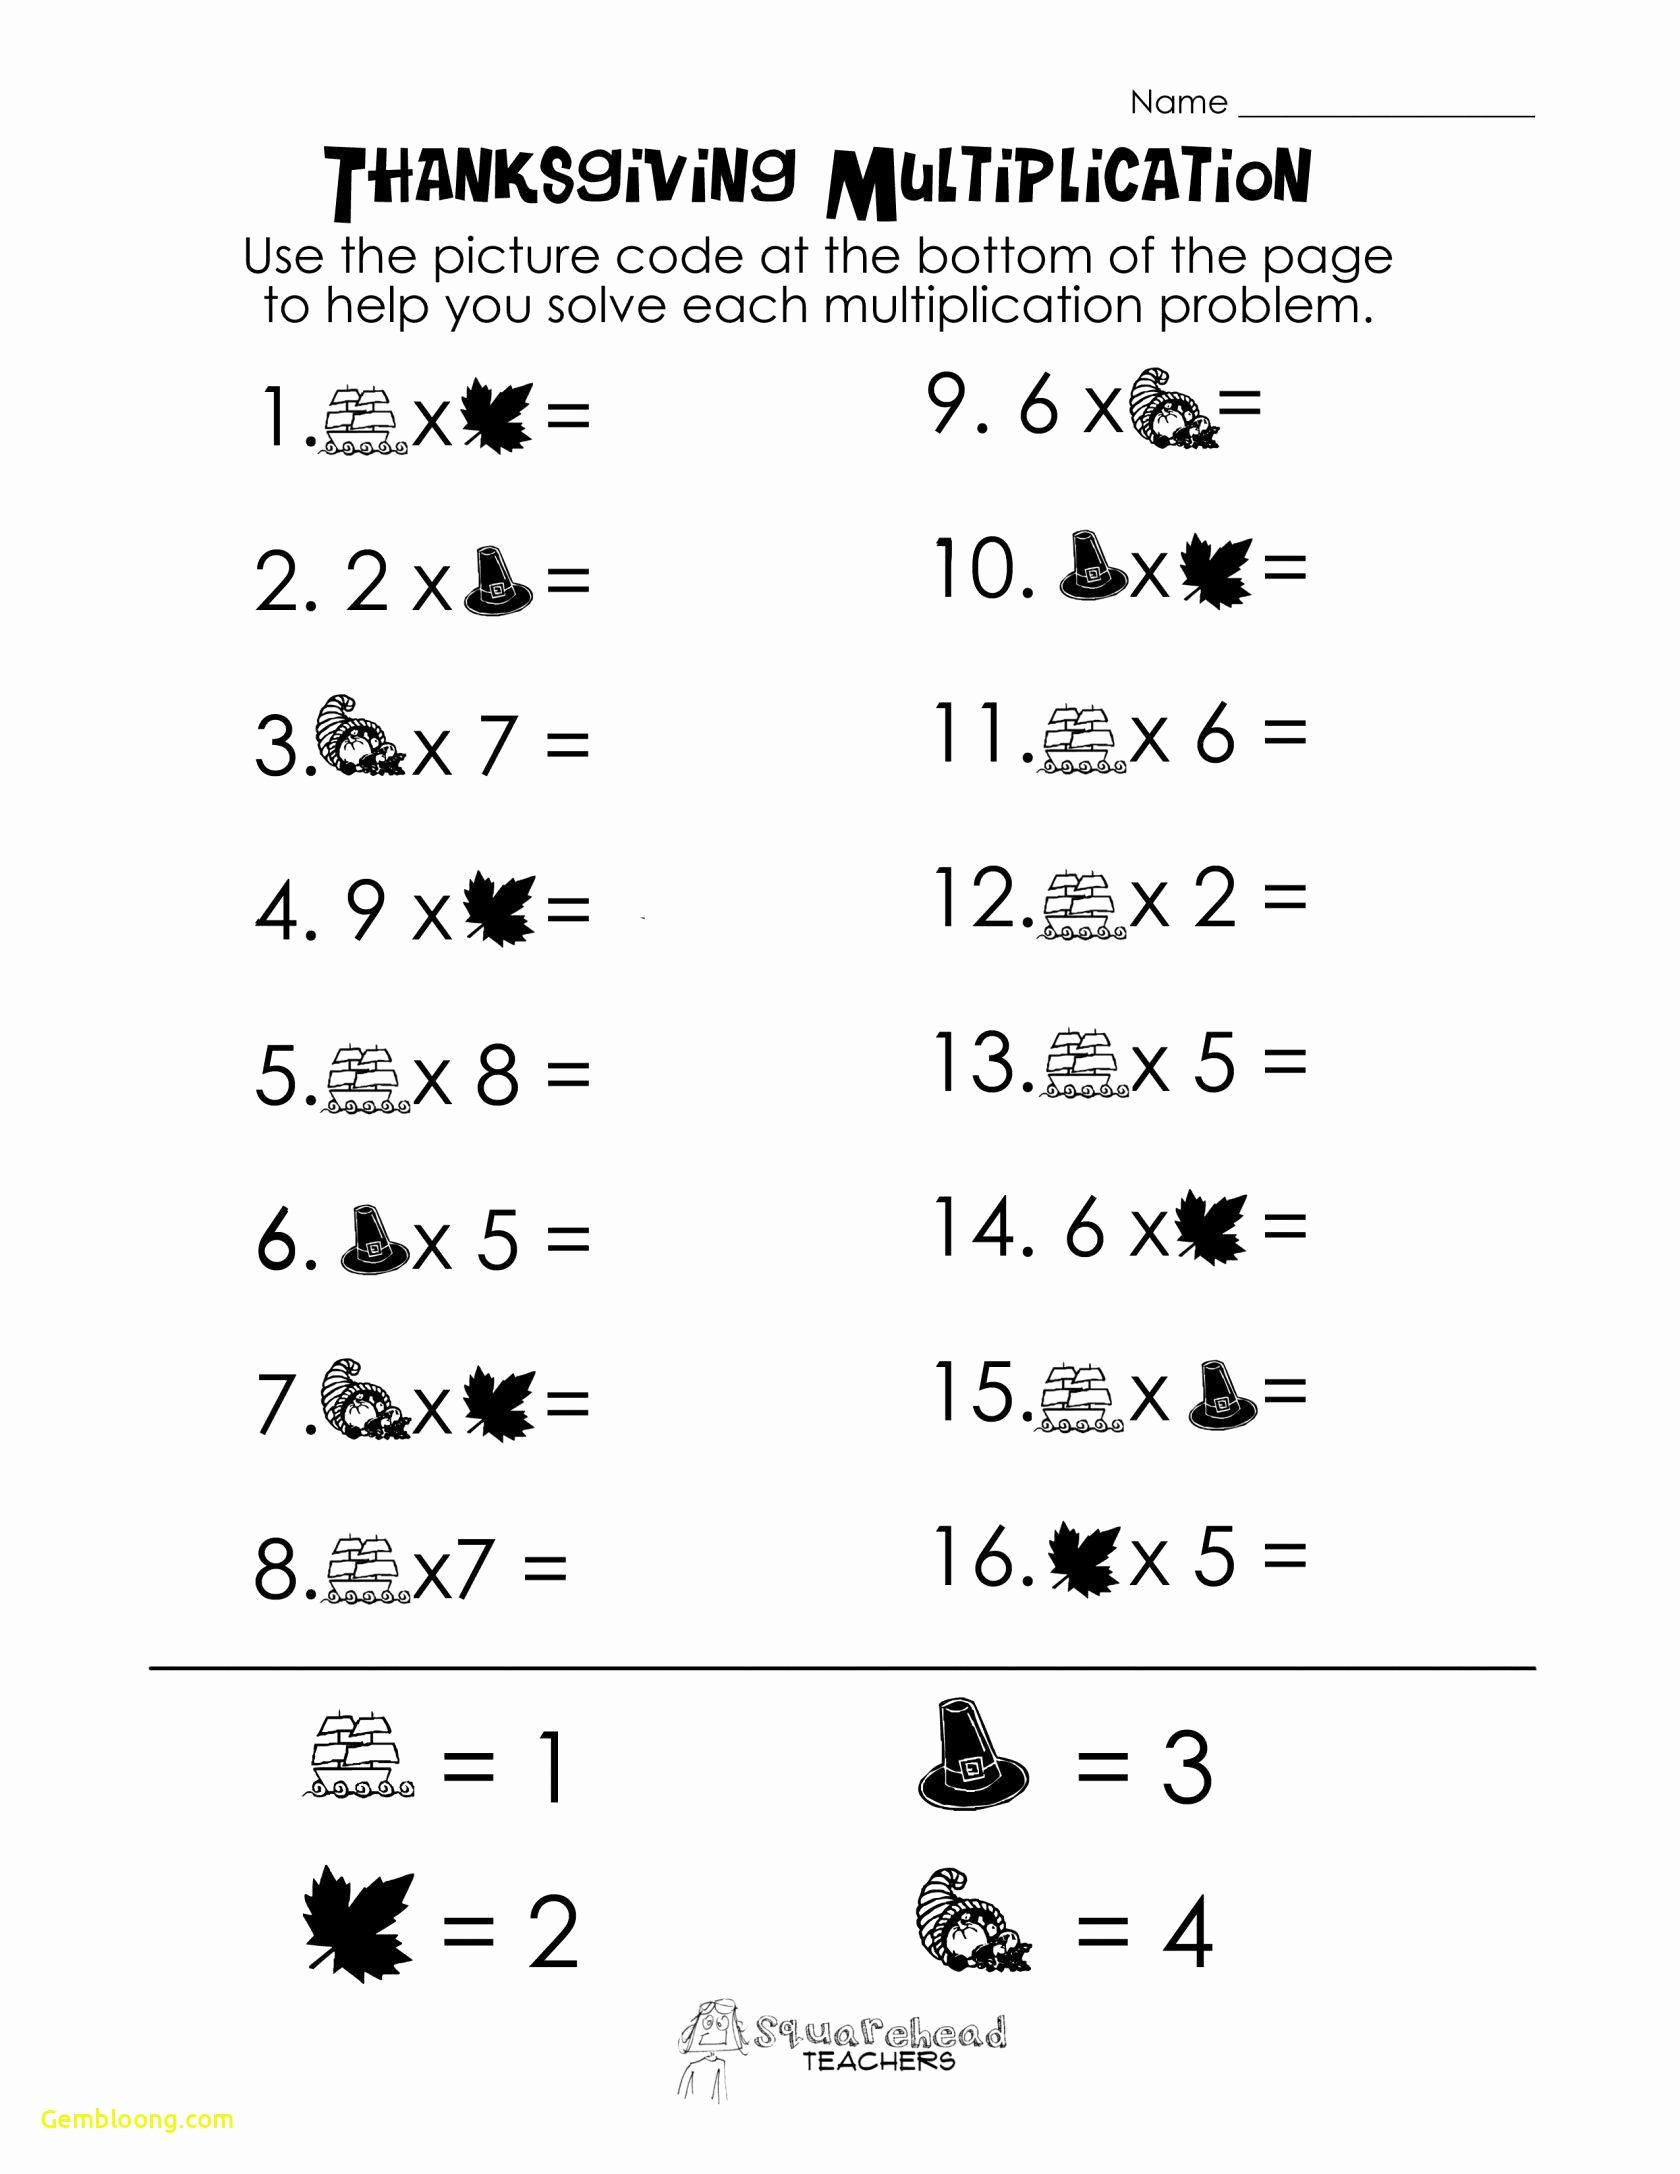 Geometric Sequences Worksheet Answers Inspirational Geometric Sequences and Series Worksheet Answers